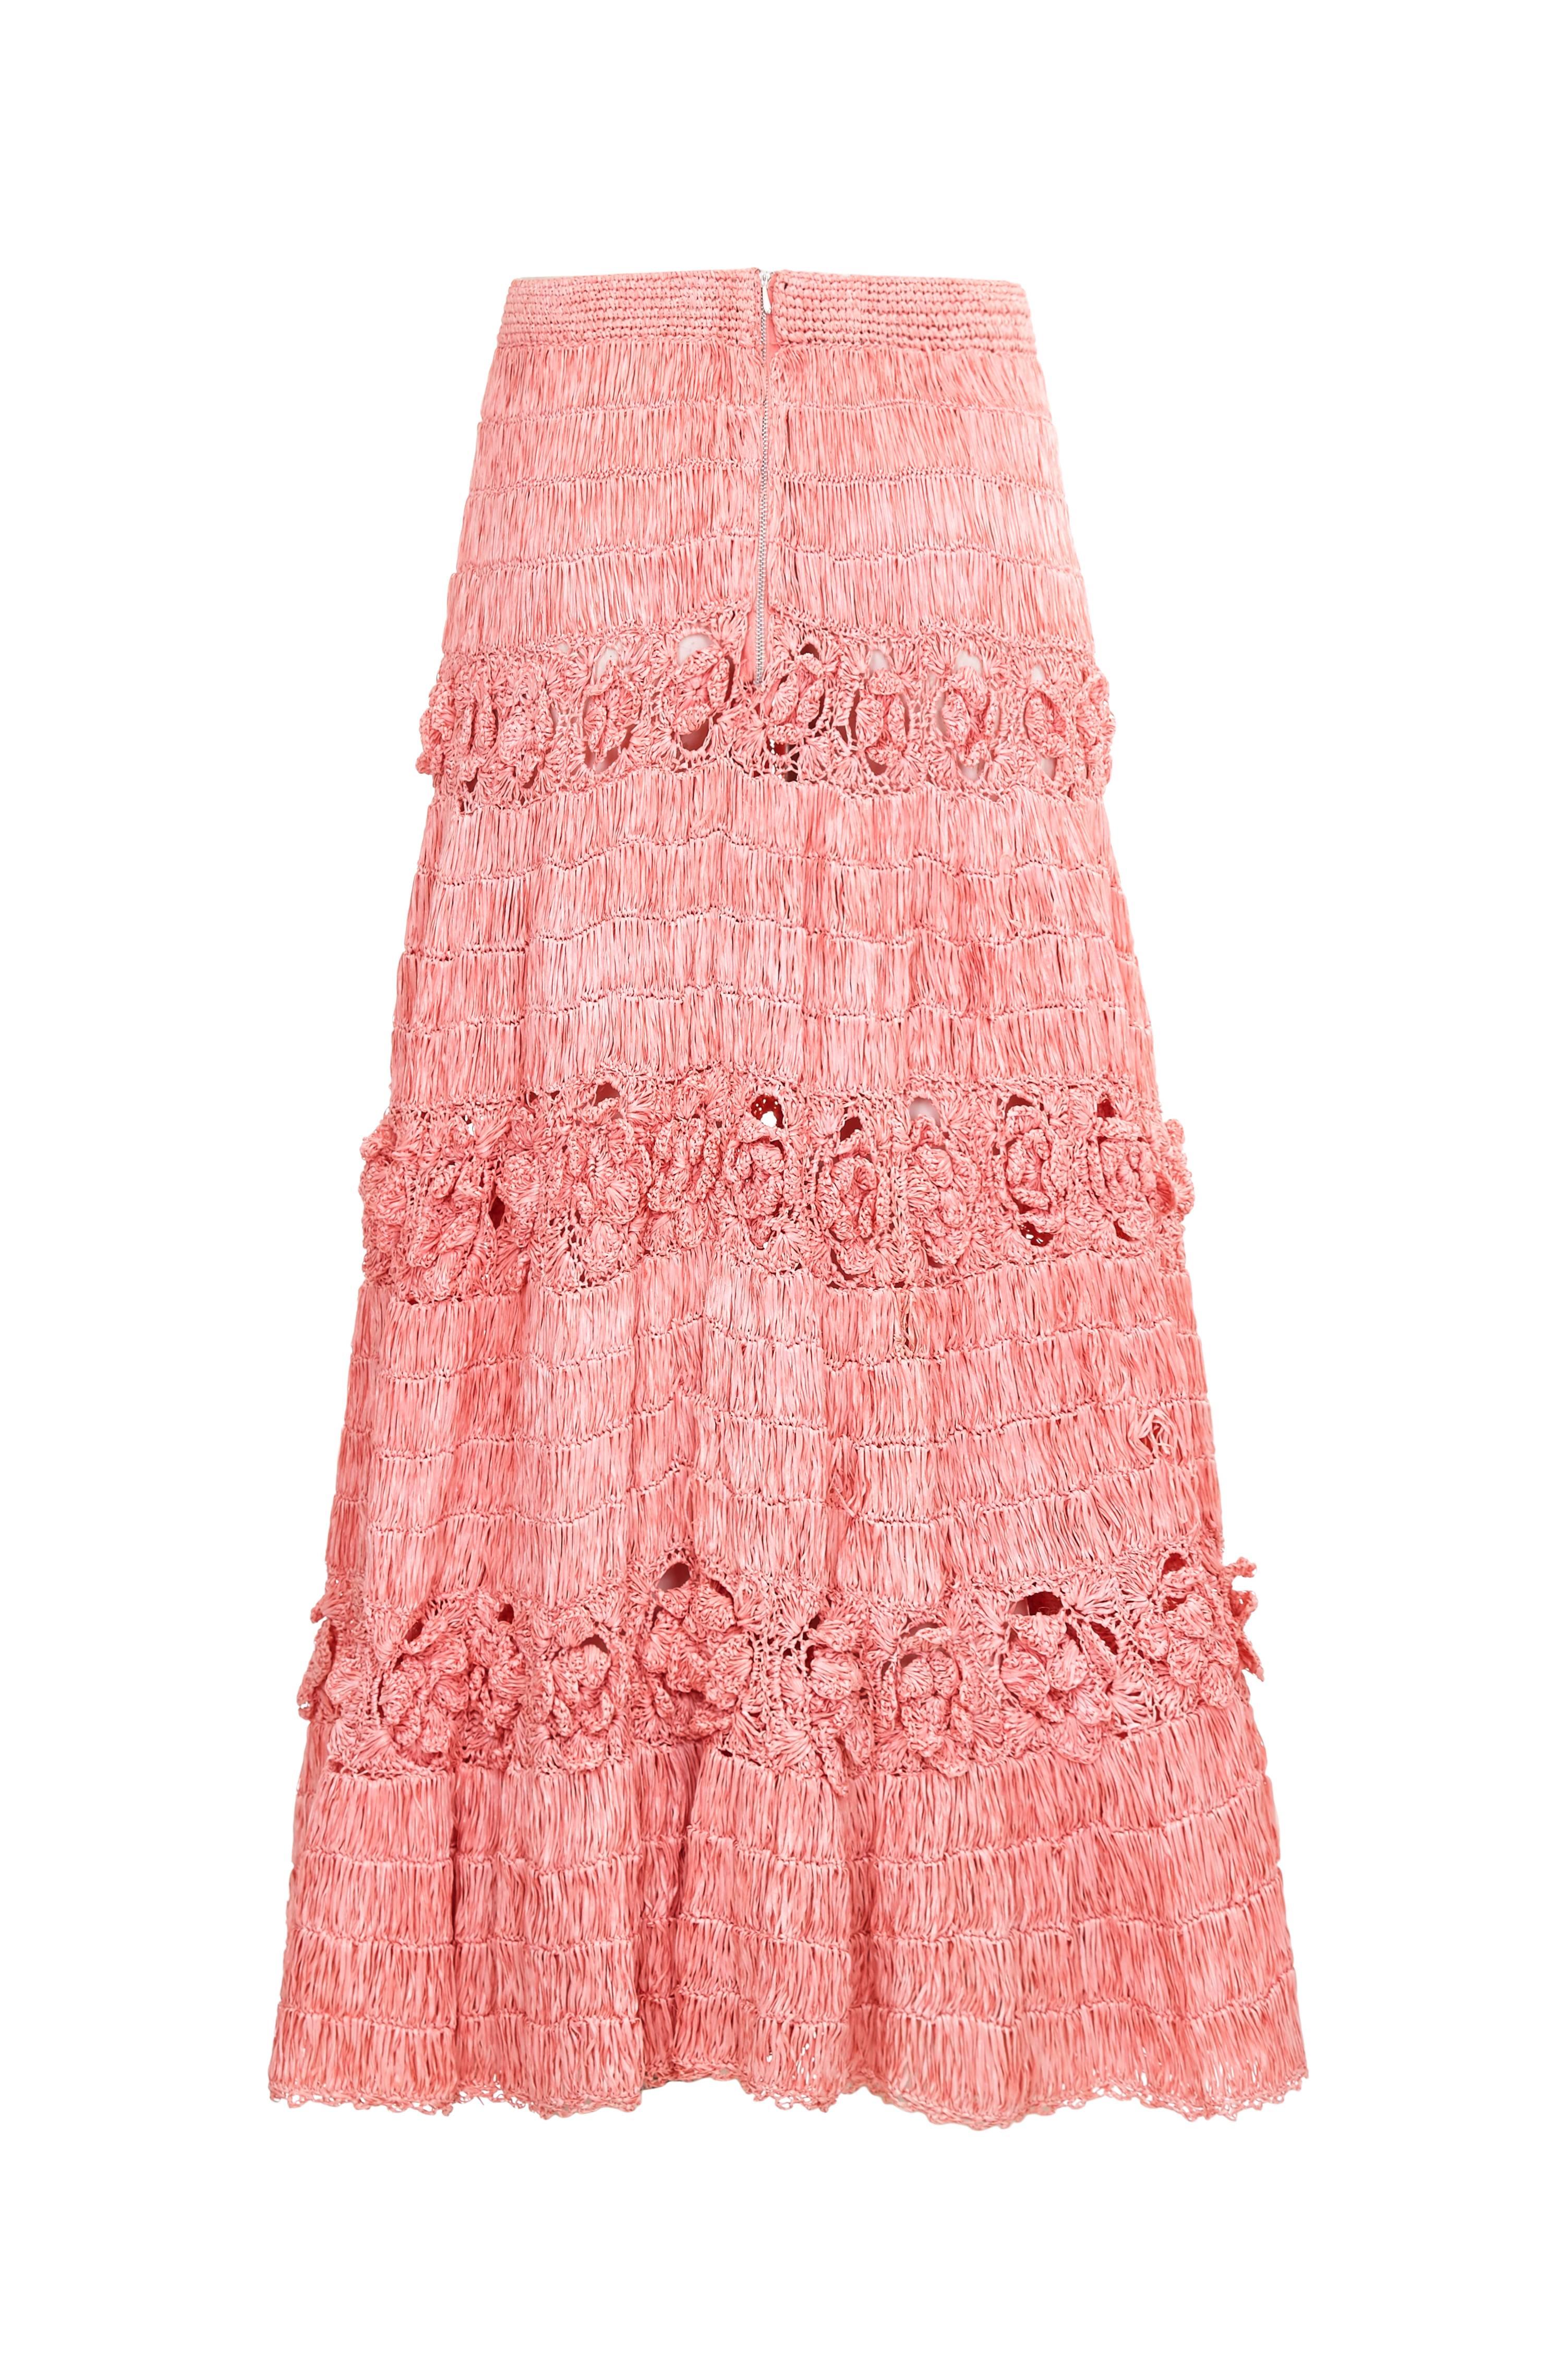 This extraordinary 1950s pale pink raffia skirt is a rare and extremely collectable piece. The intricate woven textile is interspersed with bands of detailed floral crochet work to create a tiered aesthetic and the textured fabric hangs beautifully